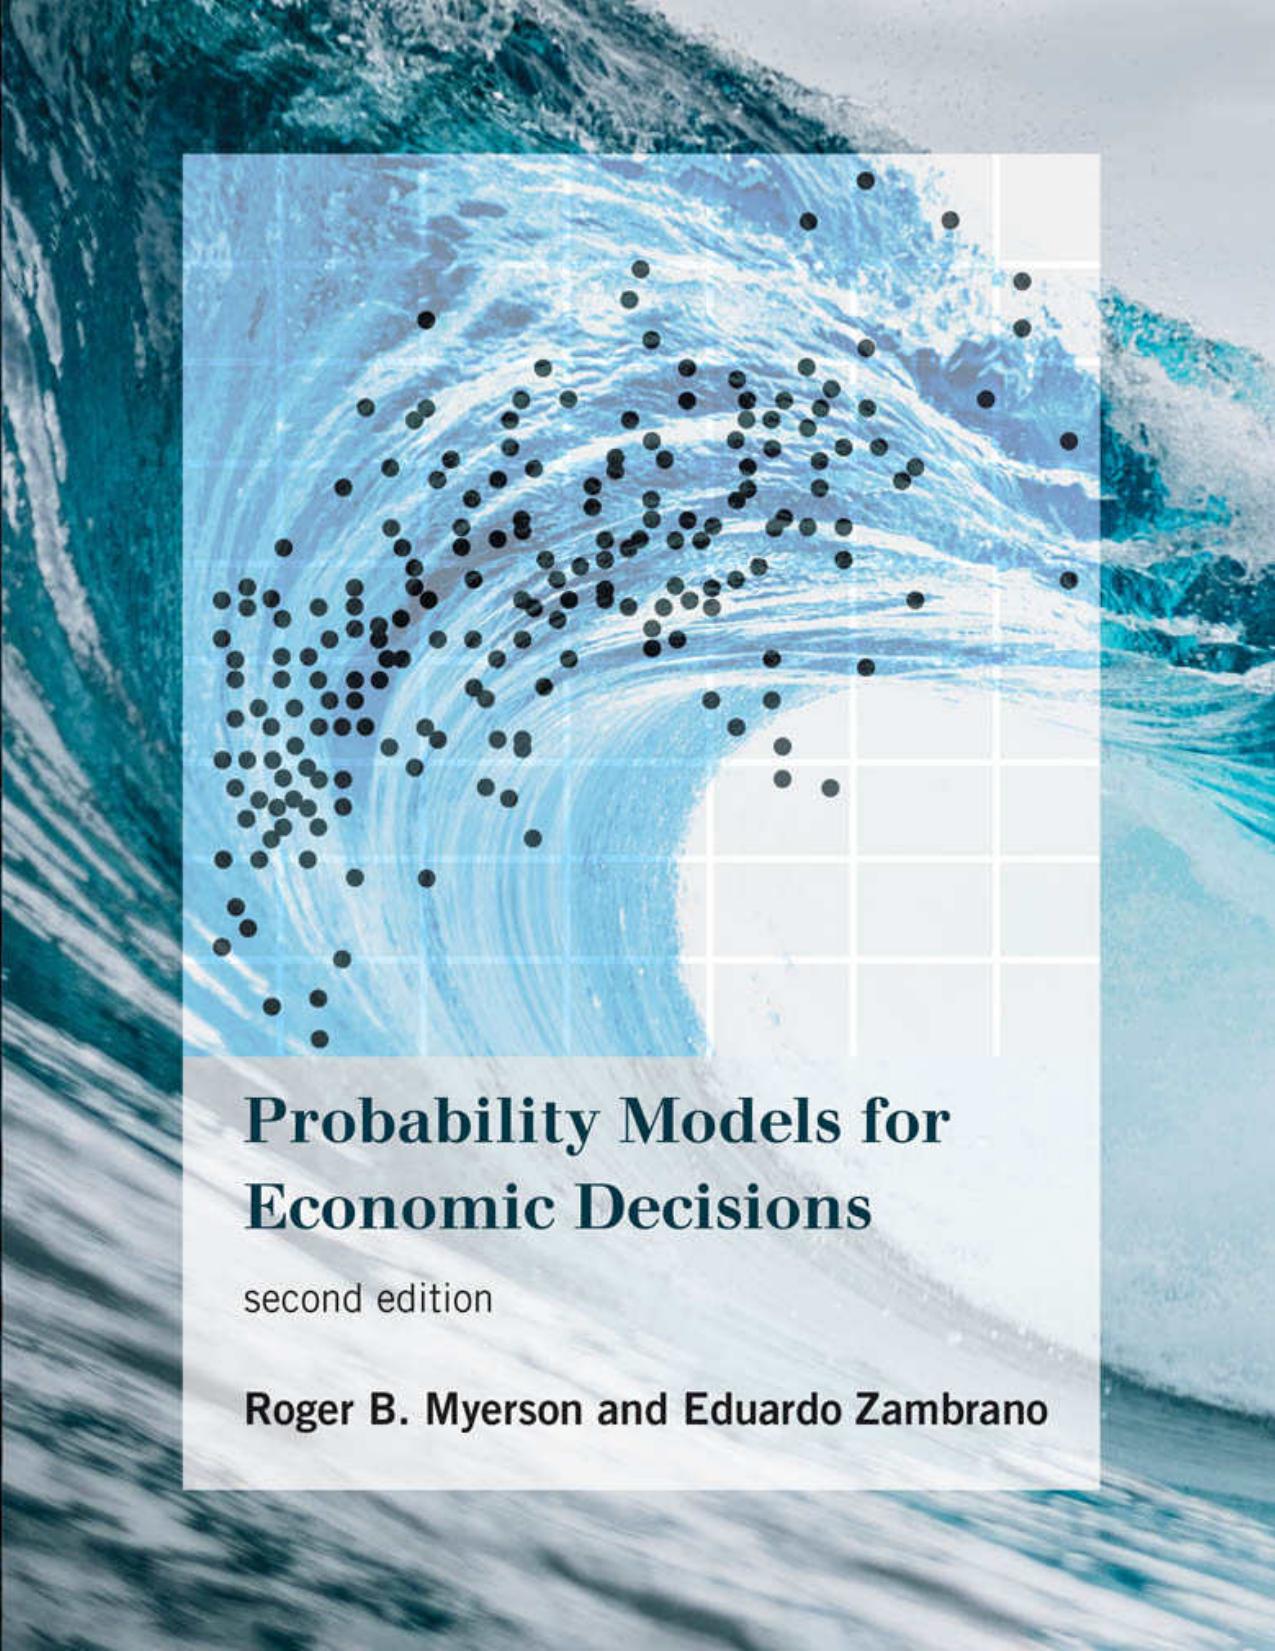 Probability Models for Economic Decisions by Roger B. Myerson.jpg